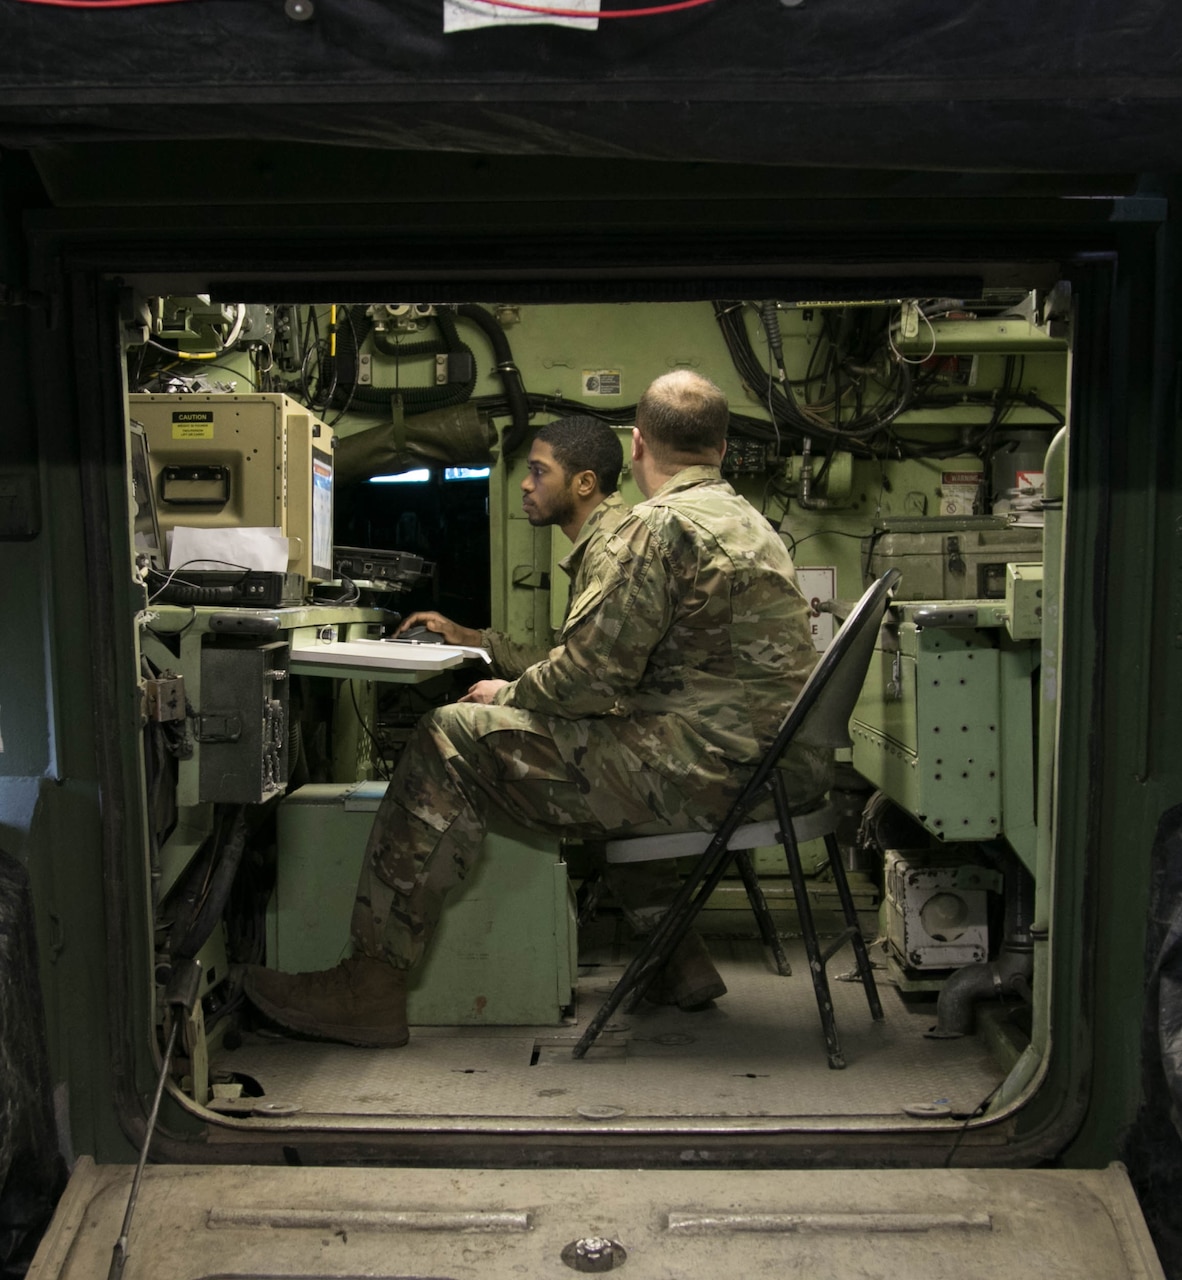 Army Sgt. Darryl Griffith, looking at a computer screen, tracks, manages and relays data to fire support assets from the fire direction center during a live-fire training exercise at Grafenwoehr Training Area, Germany, Feb. 2, 2018. Griffith is a fire support specialist assigned to 1st Battalion, 7th Field Artillery Regiment. Army photo by Staff Sgt. Sharon Matthias